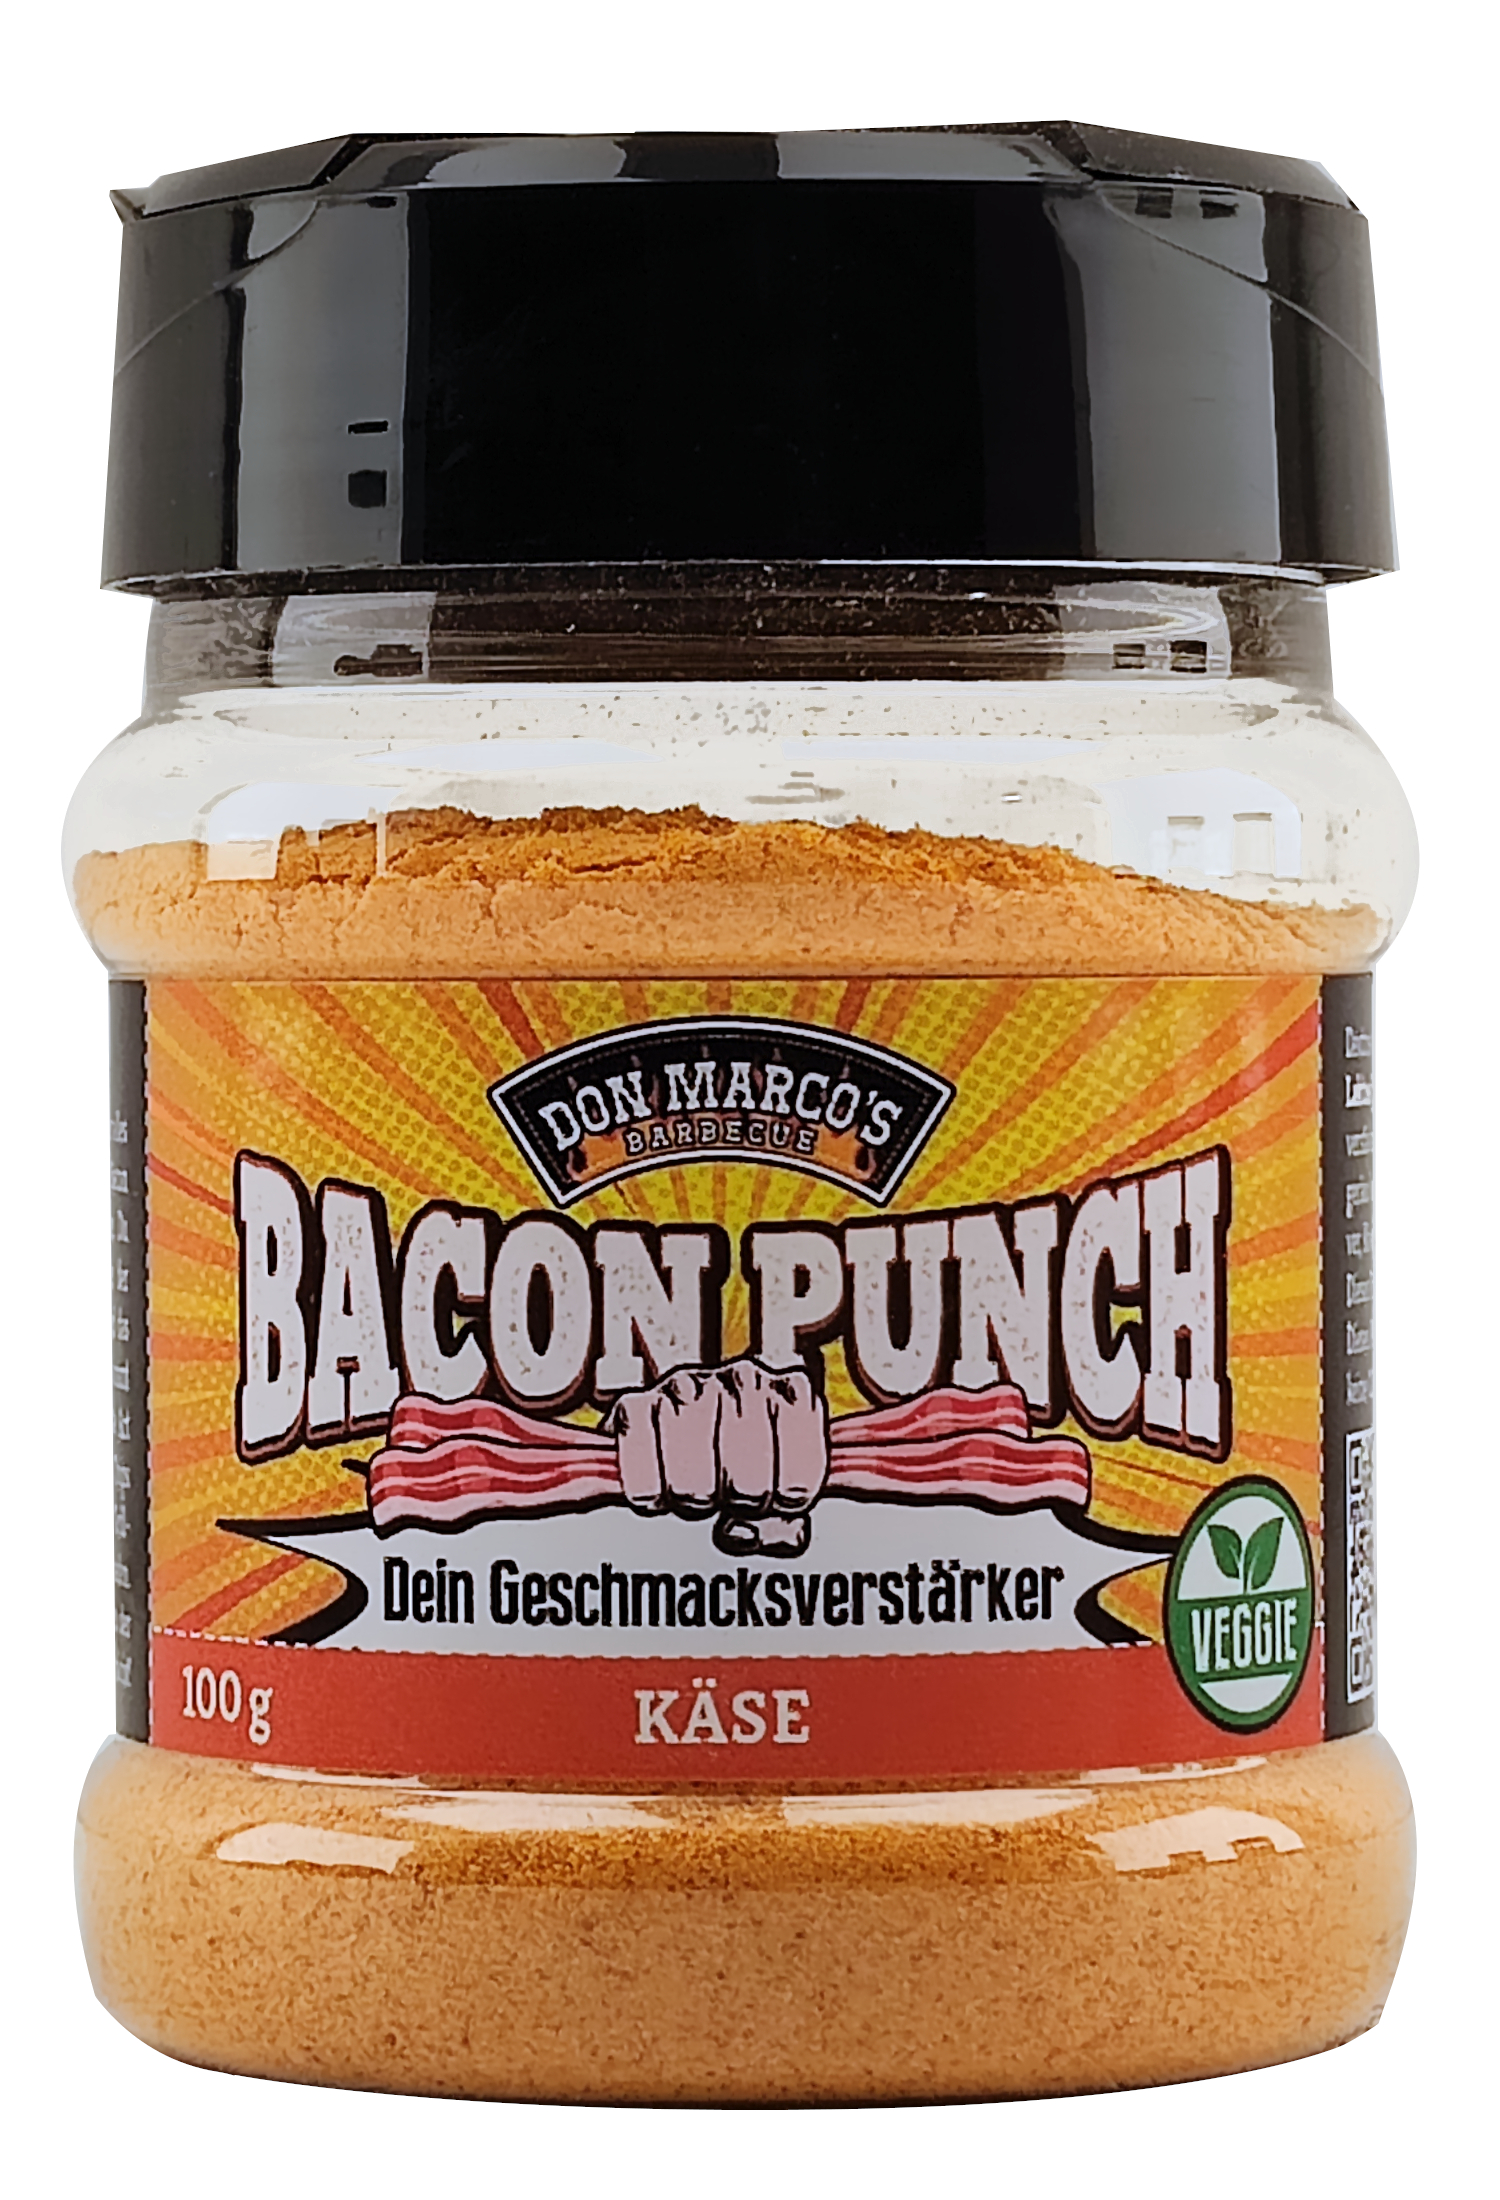 Don Marco’s Barbecue Bacon Punch Käse 100g